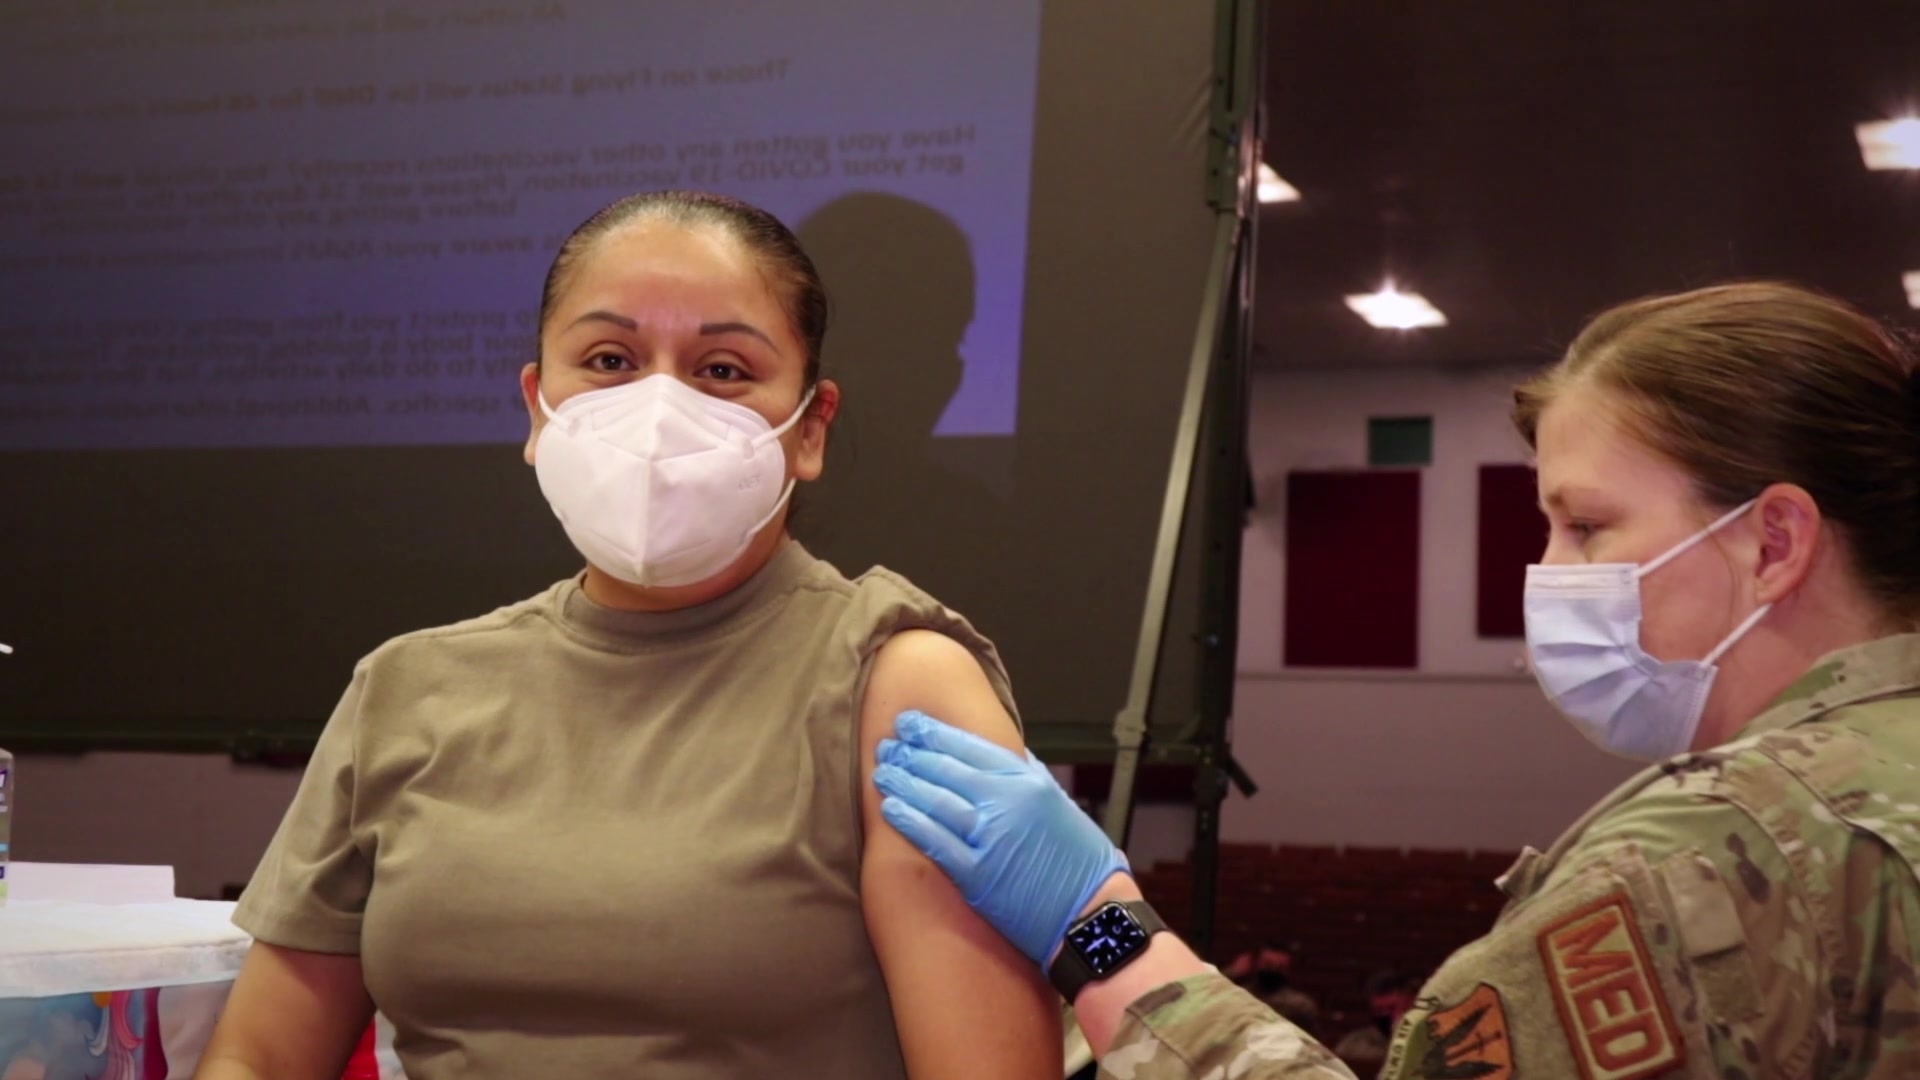 Shaw Air Force Base, SC (Jan. 28, 2021) US Army Staff Sgt. Taolee Gookool, Medical NCOIC with USARCENT explains the importance of receiving the coronavirus (COVID-19) vaccine in order to help our service members flatten the curve and do our part to prevent the transmission and spread of COVID-19. The vaccine is in distribution phase 1b to include critical national capabilities, personnel deploying overseas locations, and other critical and essential support personnel. The Department of Defense is conducting a phased, standardized, and coordinated strategy to distribute and administer COVID-19 vaccines to protect our people, maintain readiness, and support the national COVID-19 response. Vaccines for COVID-19 are only available after they are demonstrated to be safe and effective in large phase-three clinical trials, have been authorized by the U.S. Food and Drug Administration, and have been manufactured and distributed safely and securely. (U.S. Army video by Mass Communication Specialist Staff Sgt. Anri G. Baril)